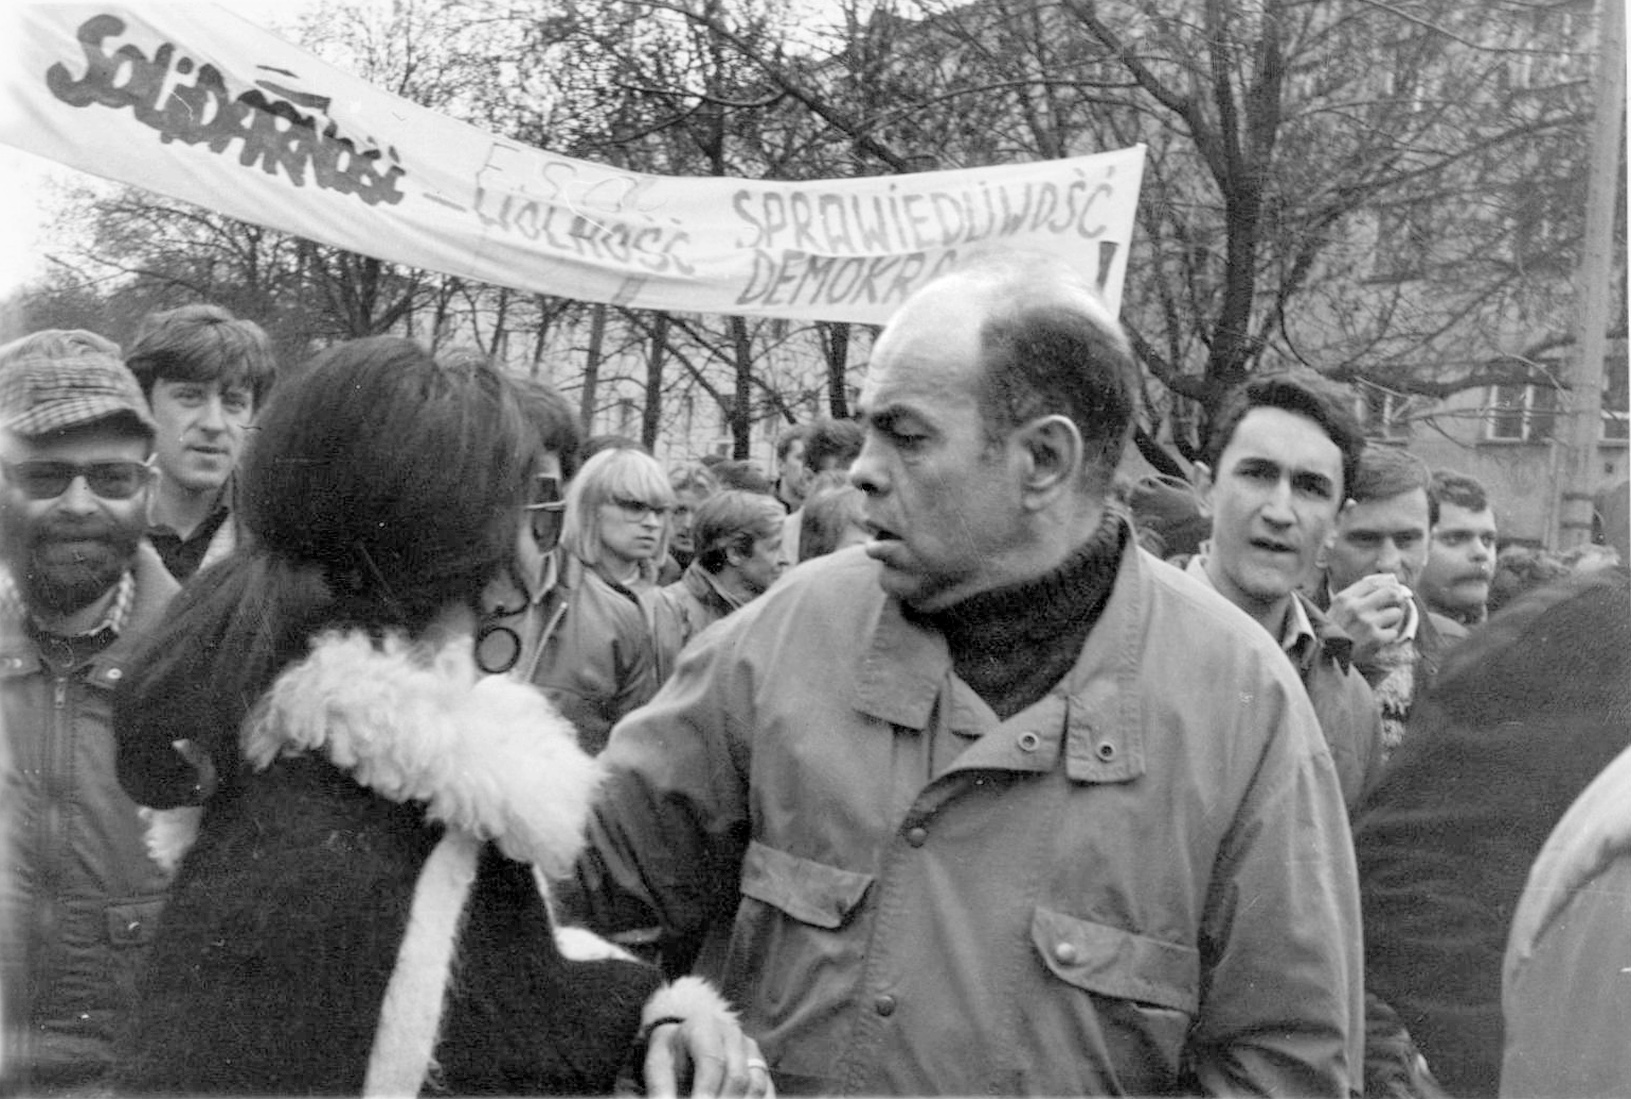 Black - white photograph of the 1989 May 1 demonstration Day with the participation of the opposition and Jacek Kuron, 24 September 2013, Black - white photograph of the 1989 May 1 demonstration Day with the participation of the opposition and Jacek Kuron. Author: Andrzej Iwański (Scanned by Europeana 1989) (CC BY-SA 3.0).